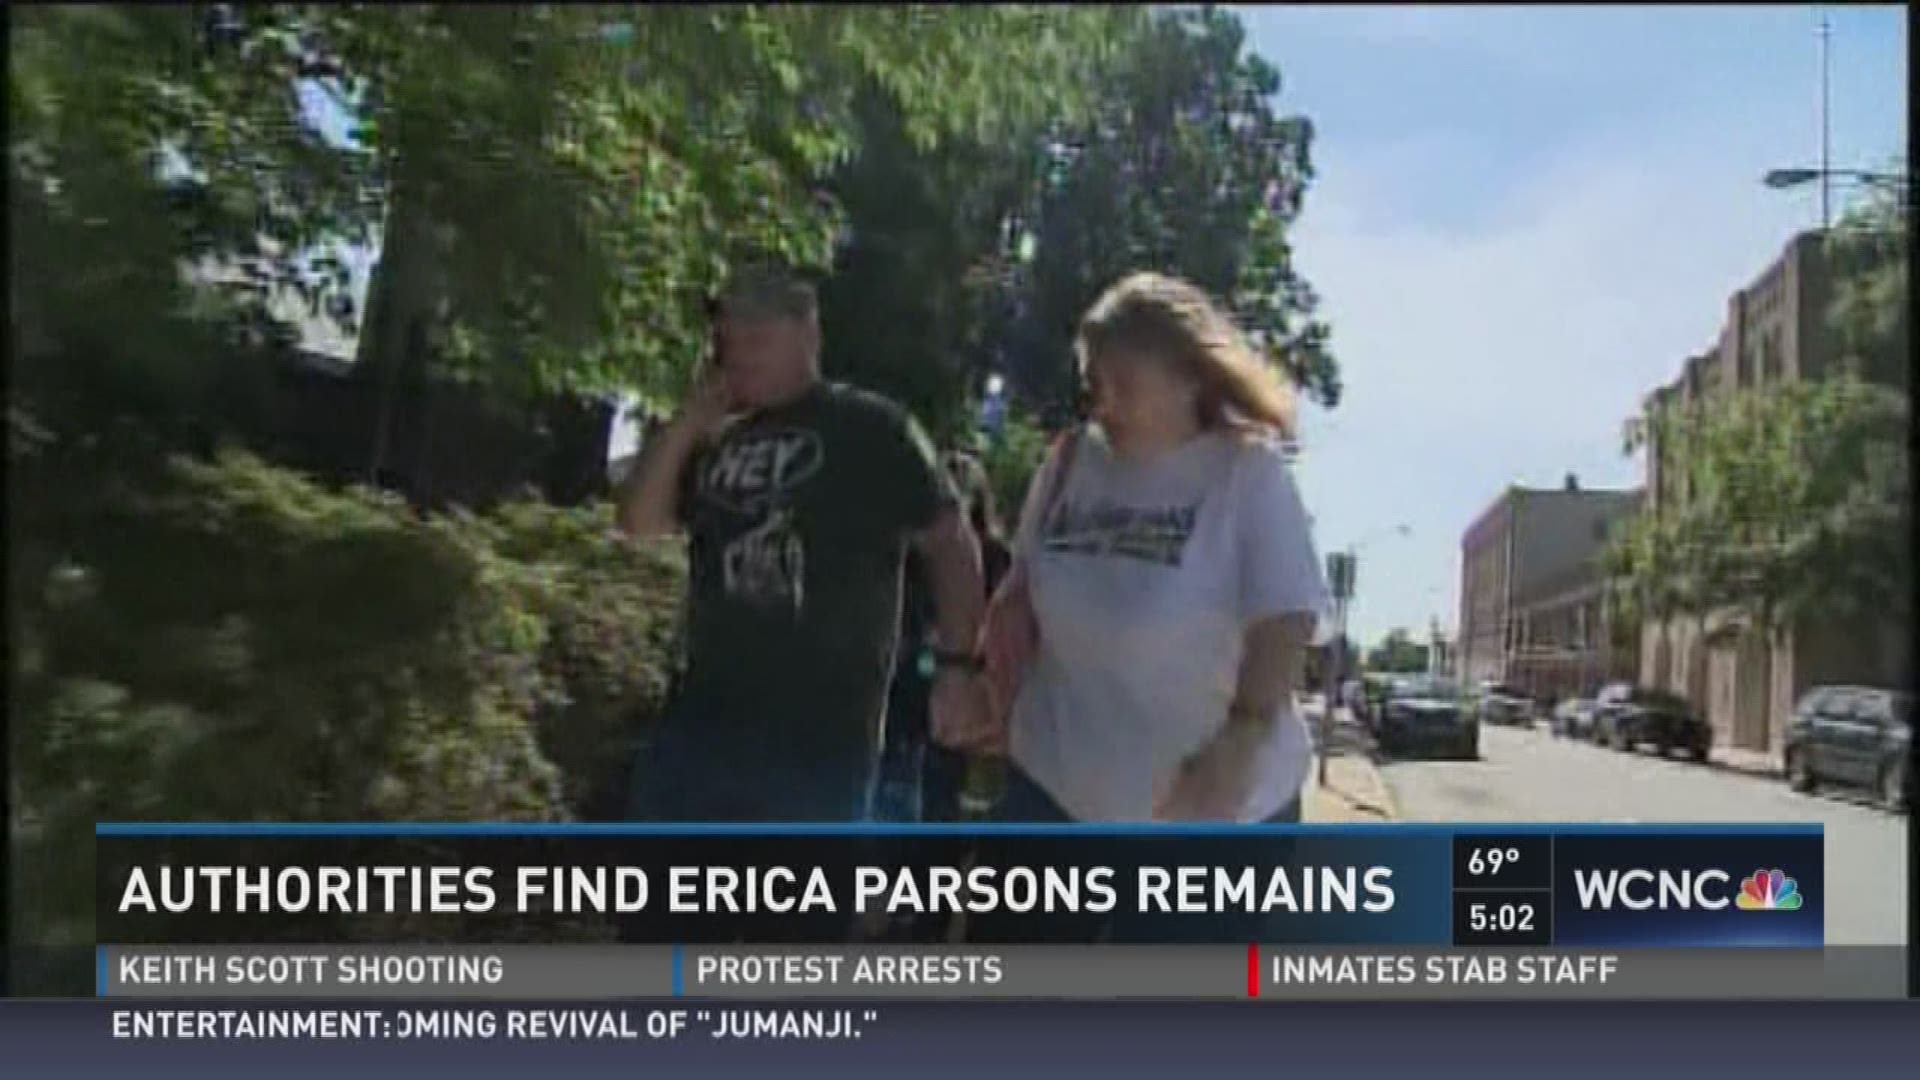 Family in prison on account of fraud charges claims they dropped Erica off with a biological family member before her disappearance.